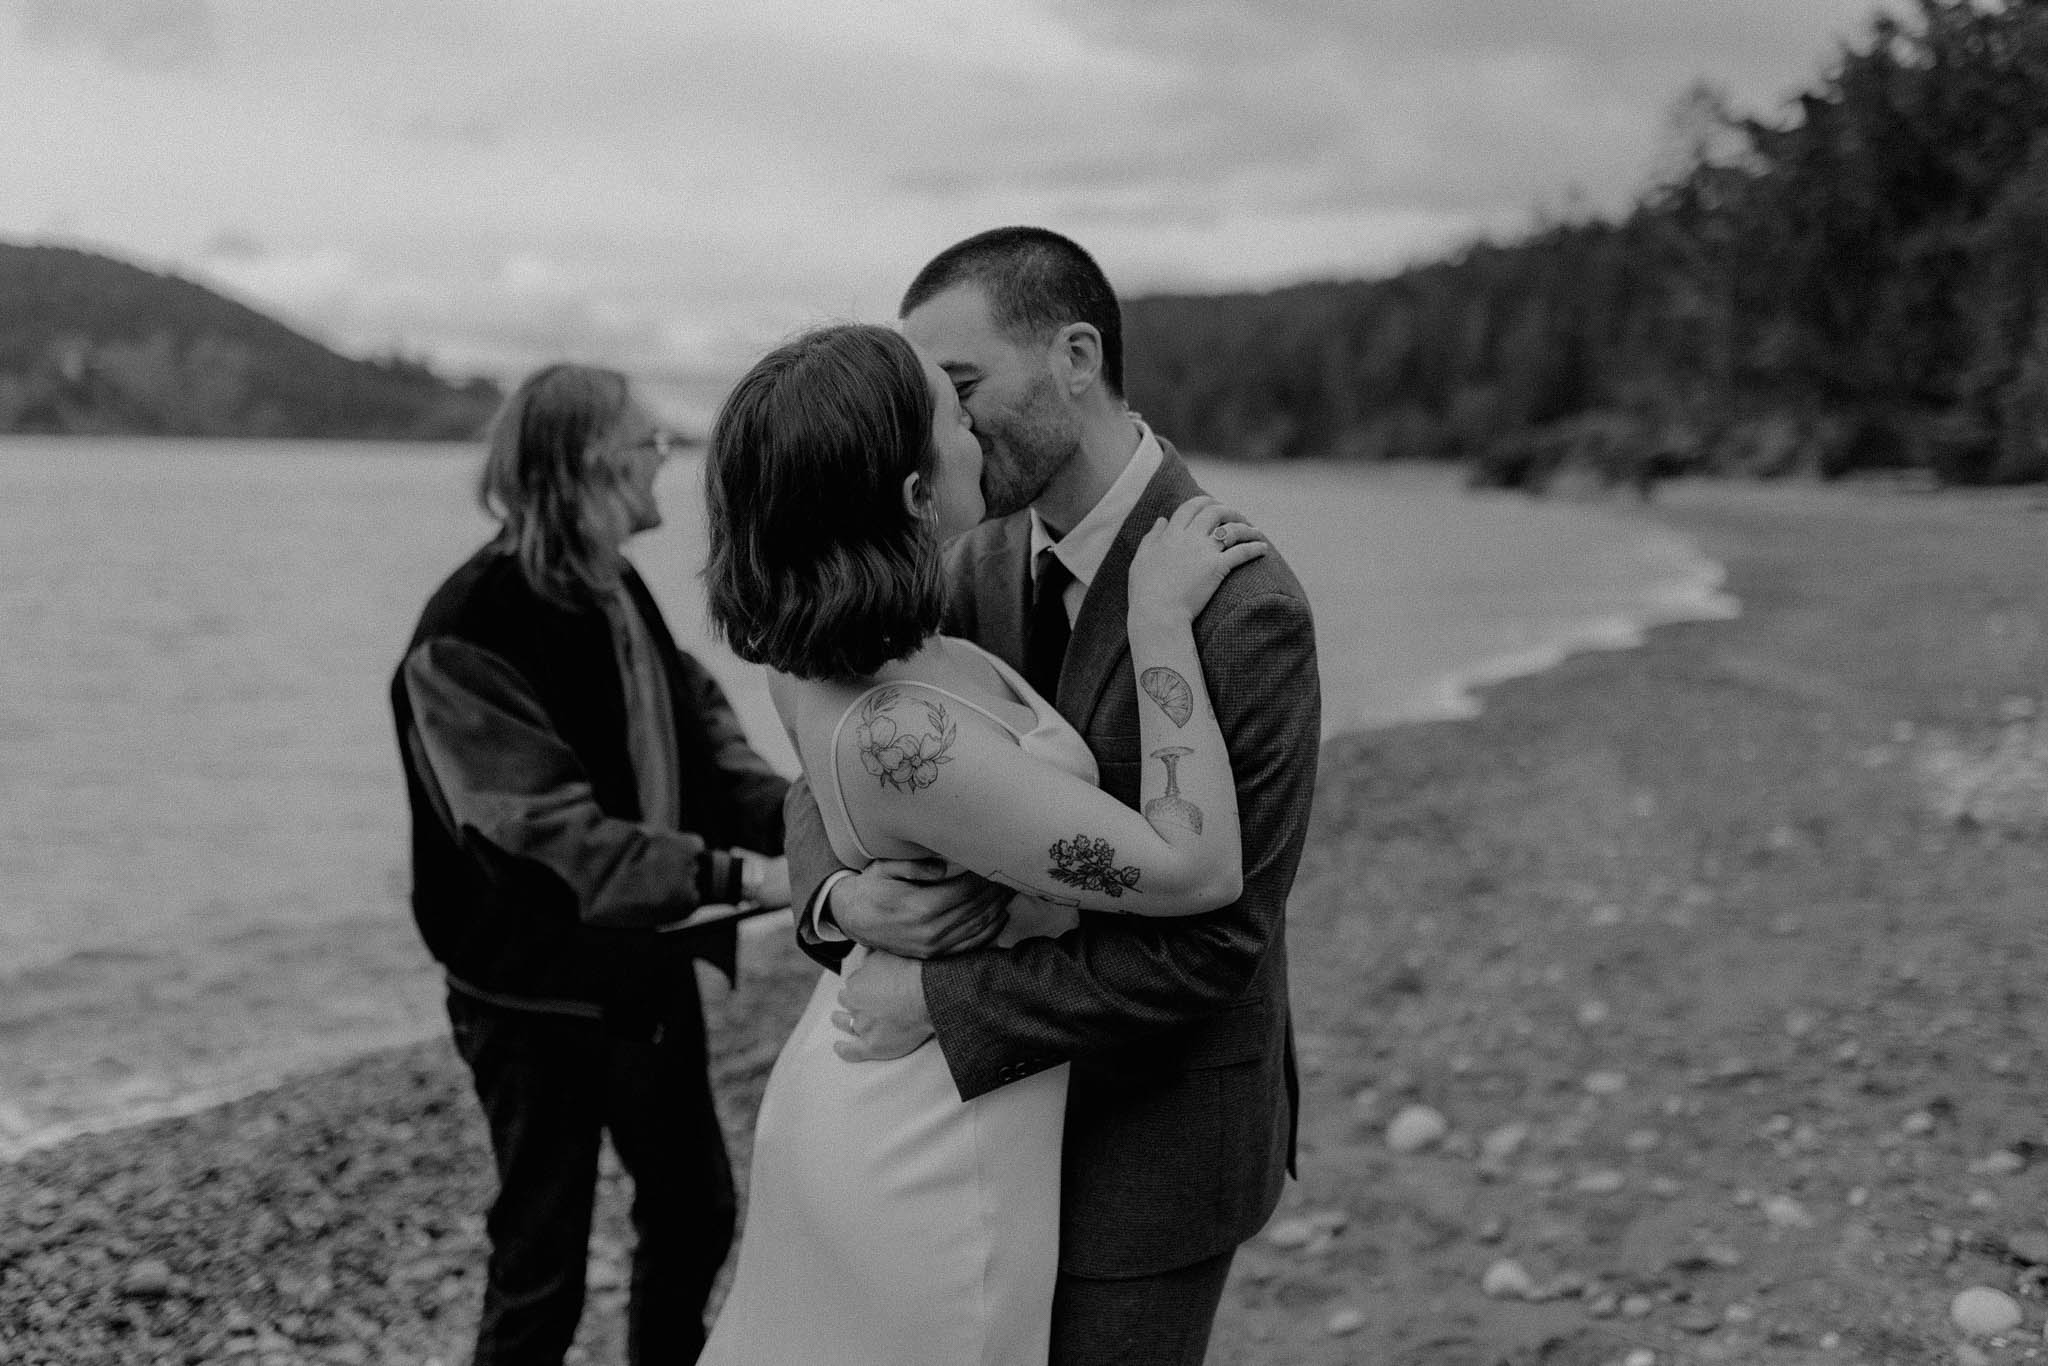 Getting married on a beach in Washington state. 